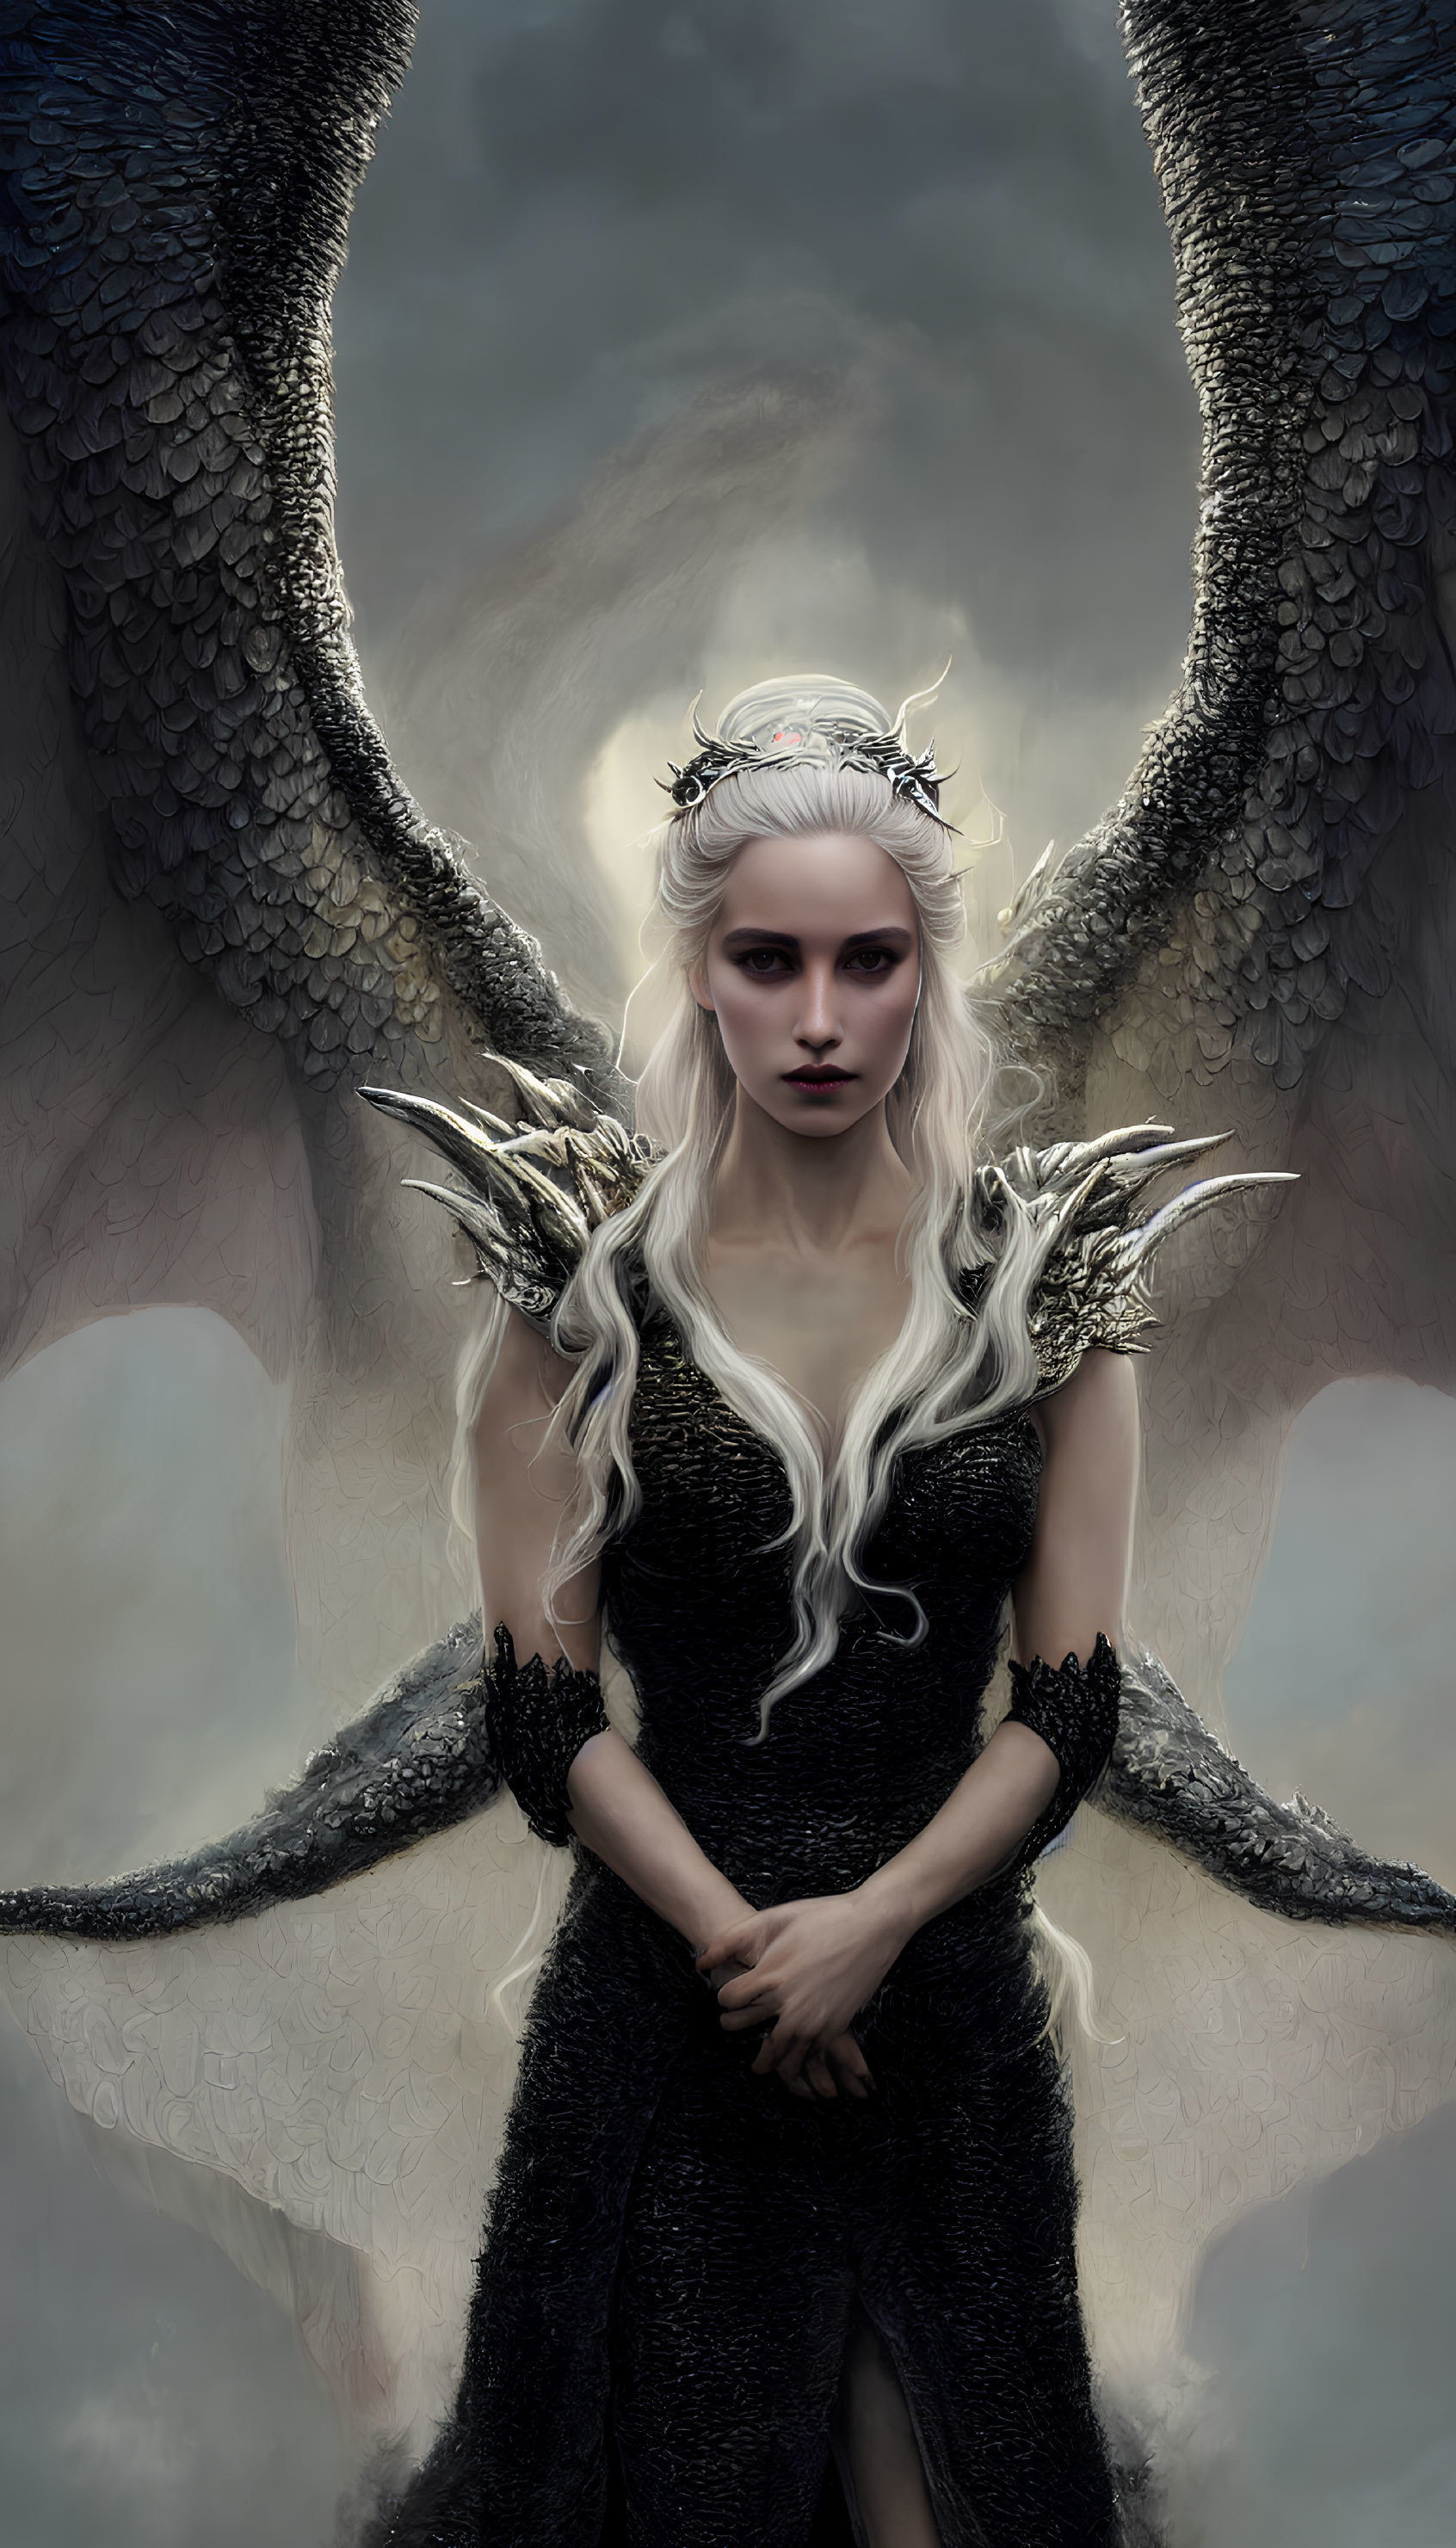 Platinum blonde woman in dark attire with giant dragon wings